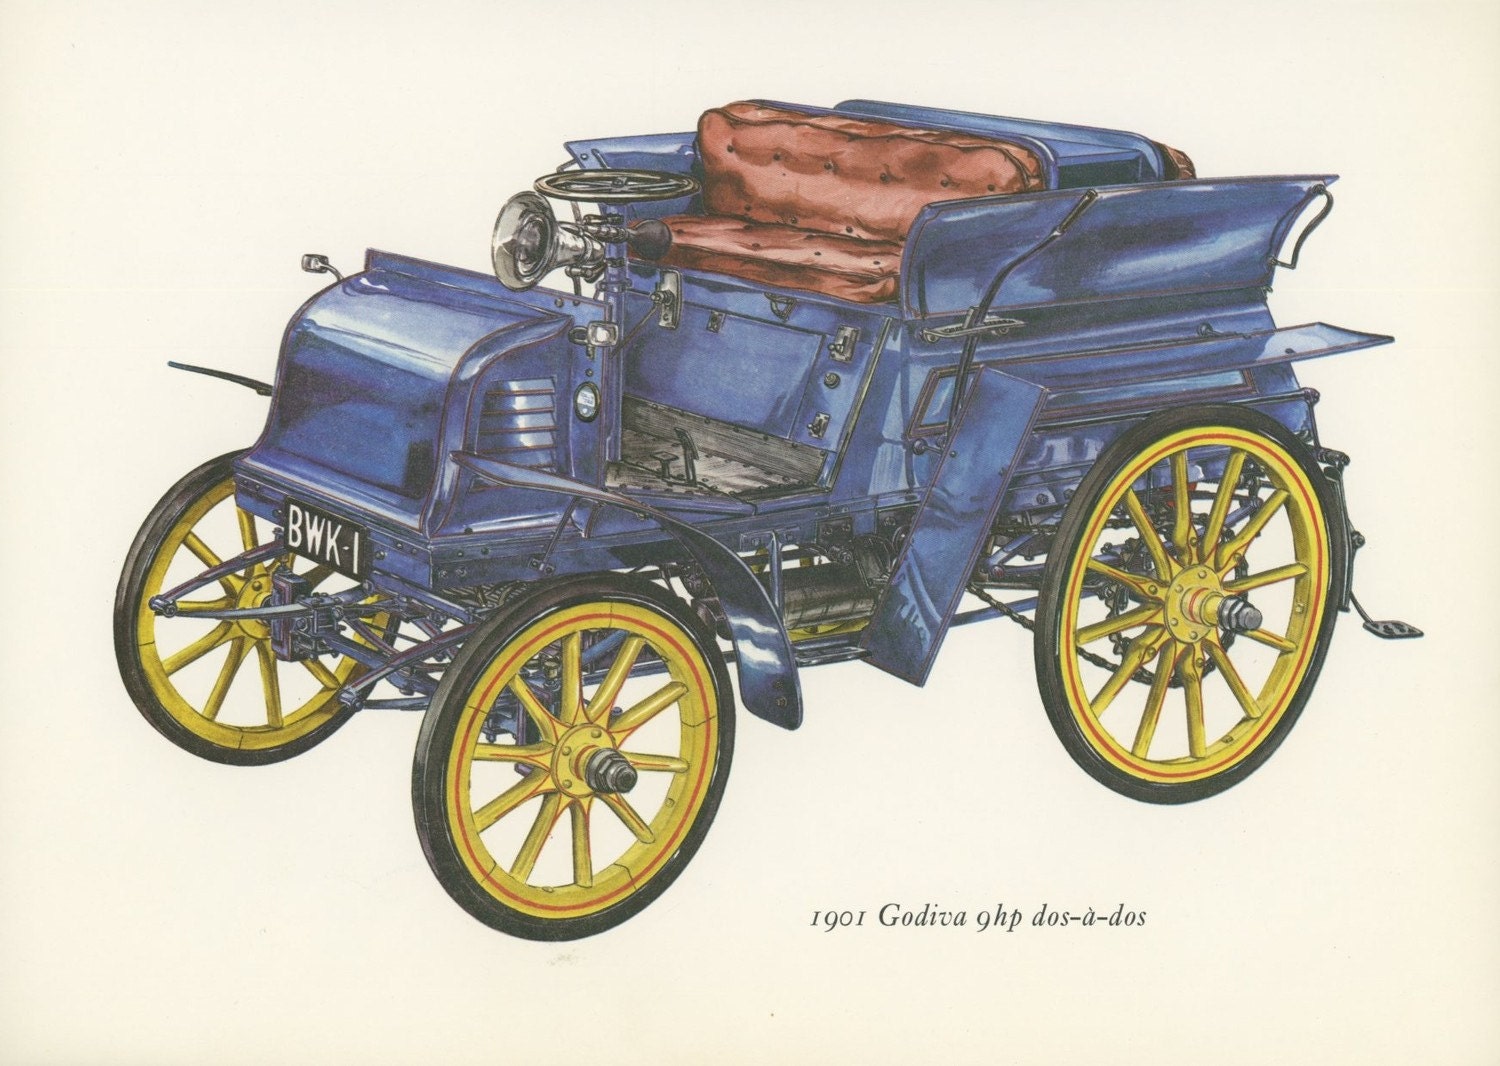 ANTIQUE CAR ART PRINTS BY ALLYSON KITTS - SHOP CANVAS AND FRAMED